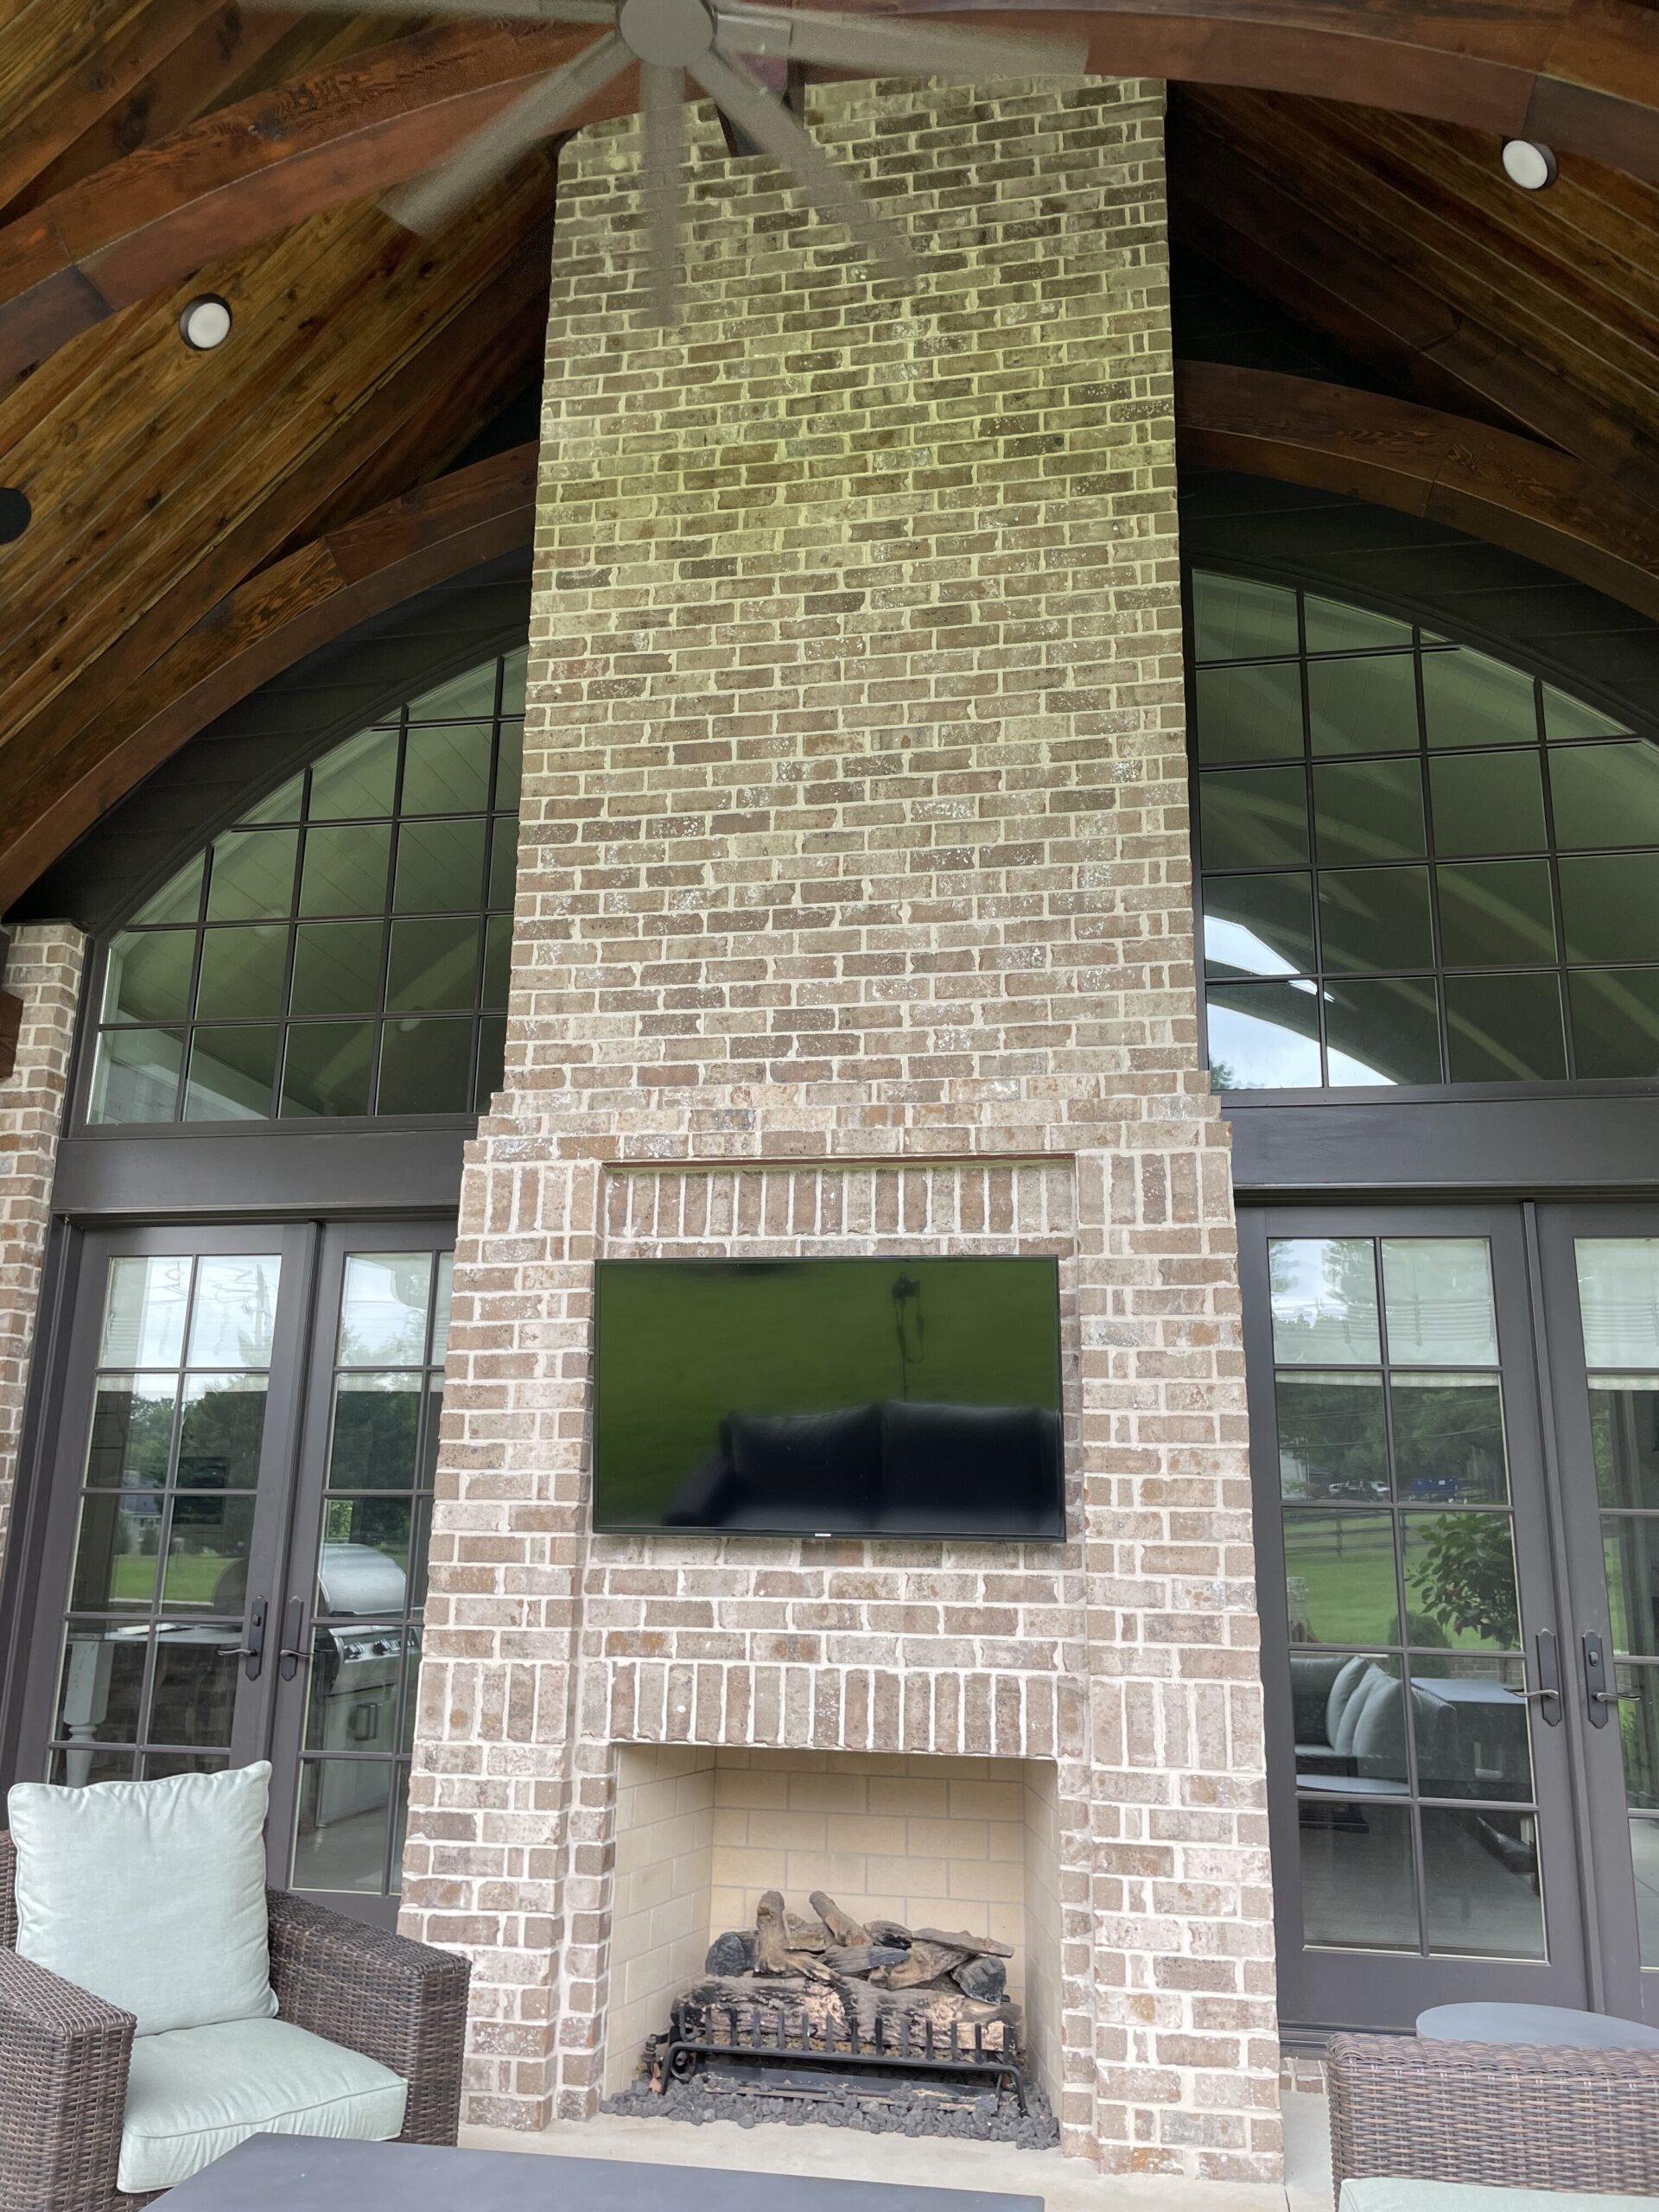 Back patio home improvement in Franklin includes a brand new fireplace and Outside TV from a Brentwood Home Builder